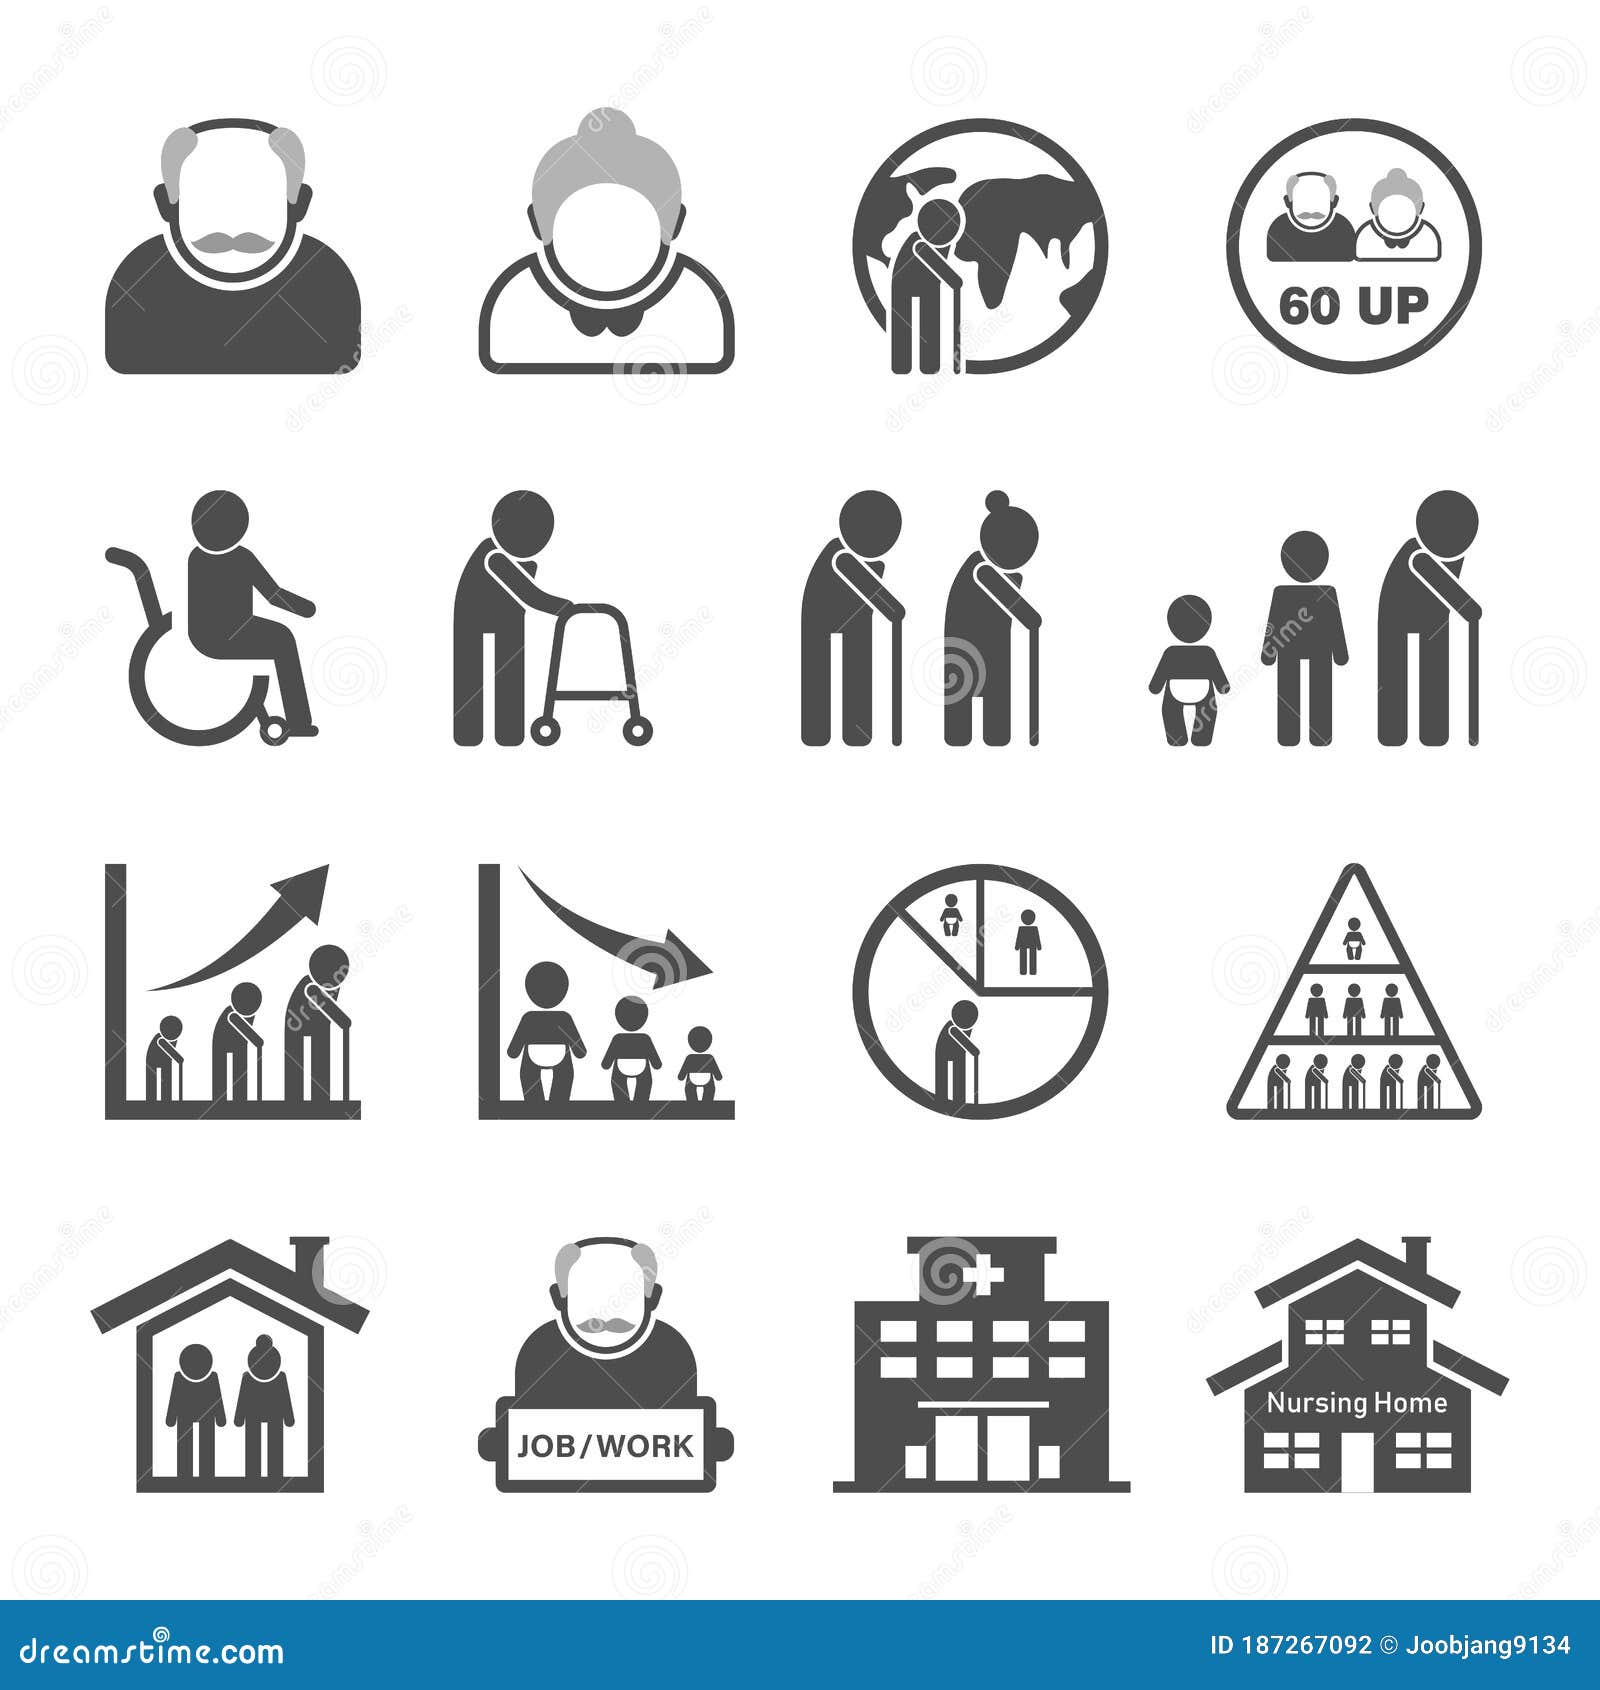 older person icon set - aging society